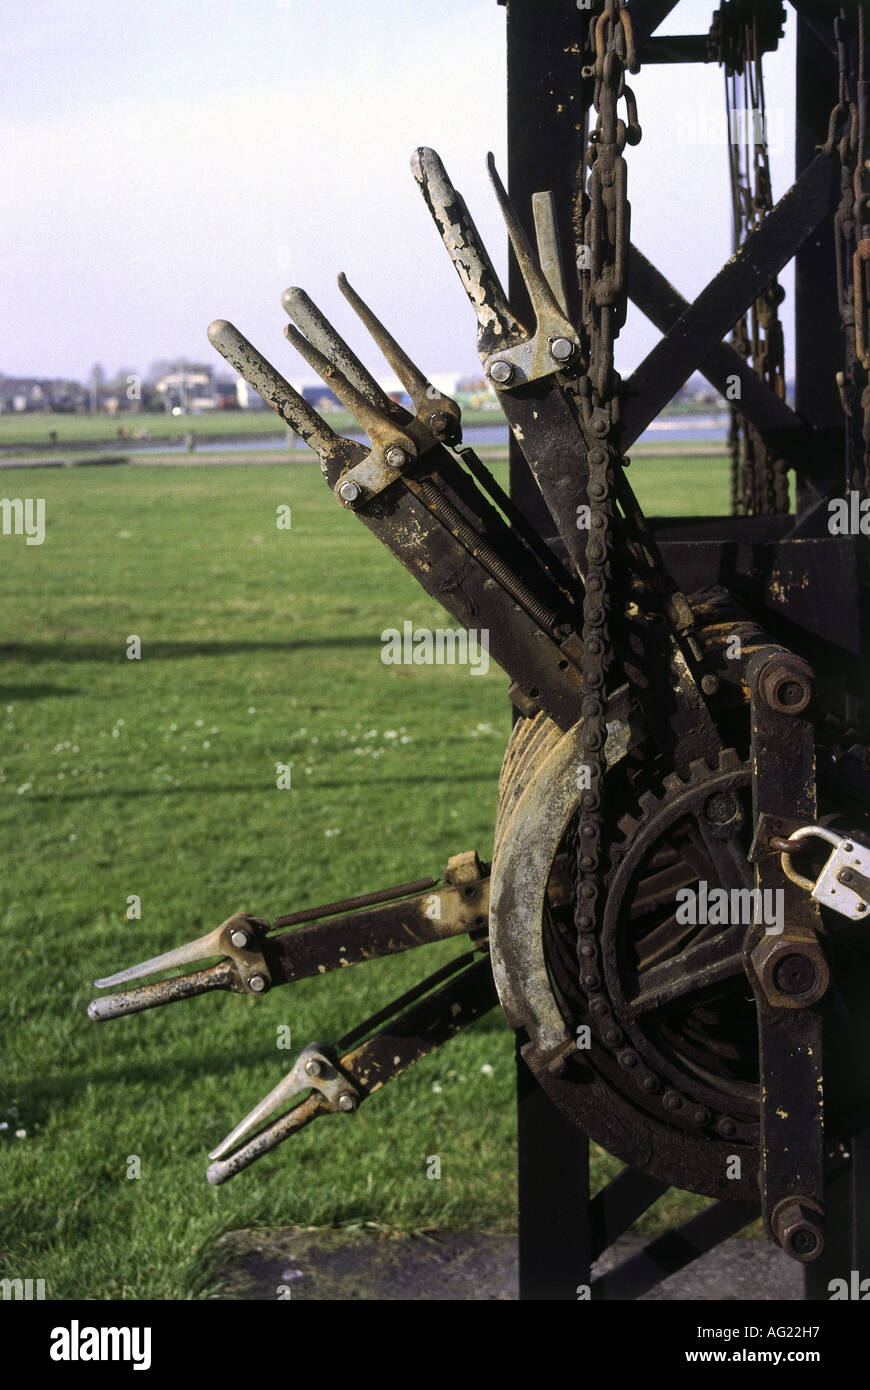 mail/post, telegraphy, semaphore, Cuxhaven, 19th century, detail, hand gear, technics, optical telegraphy, Germany, telegraph, historic, historical, Stock Photo